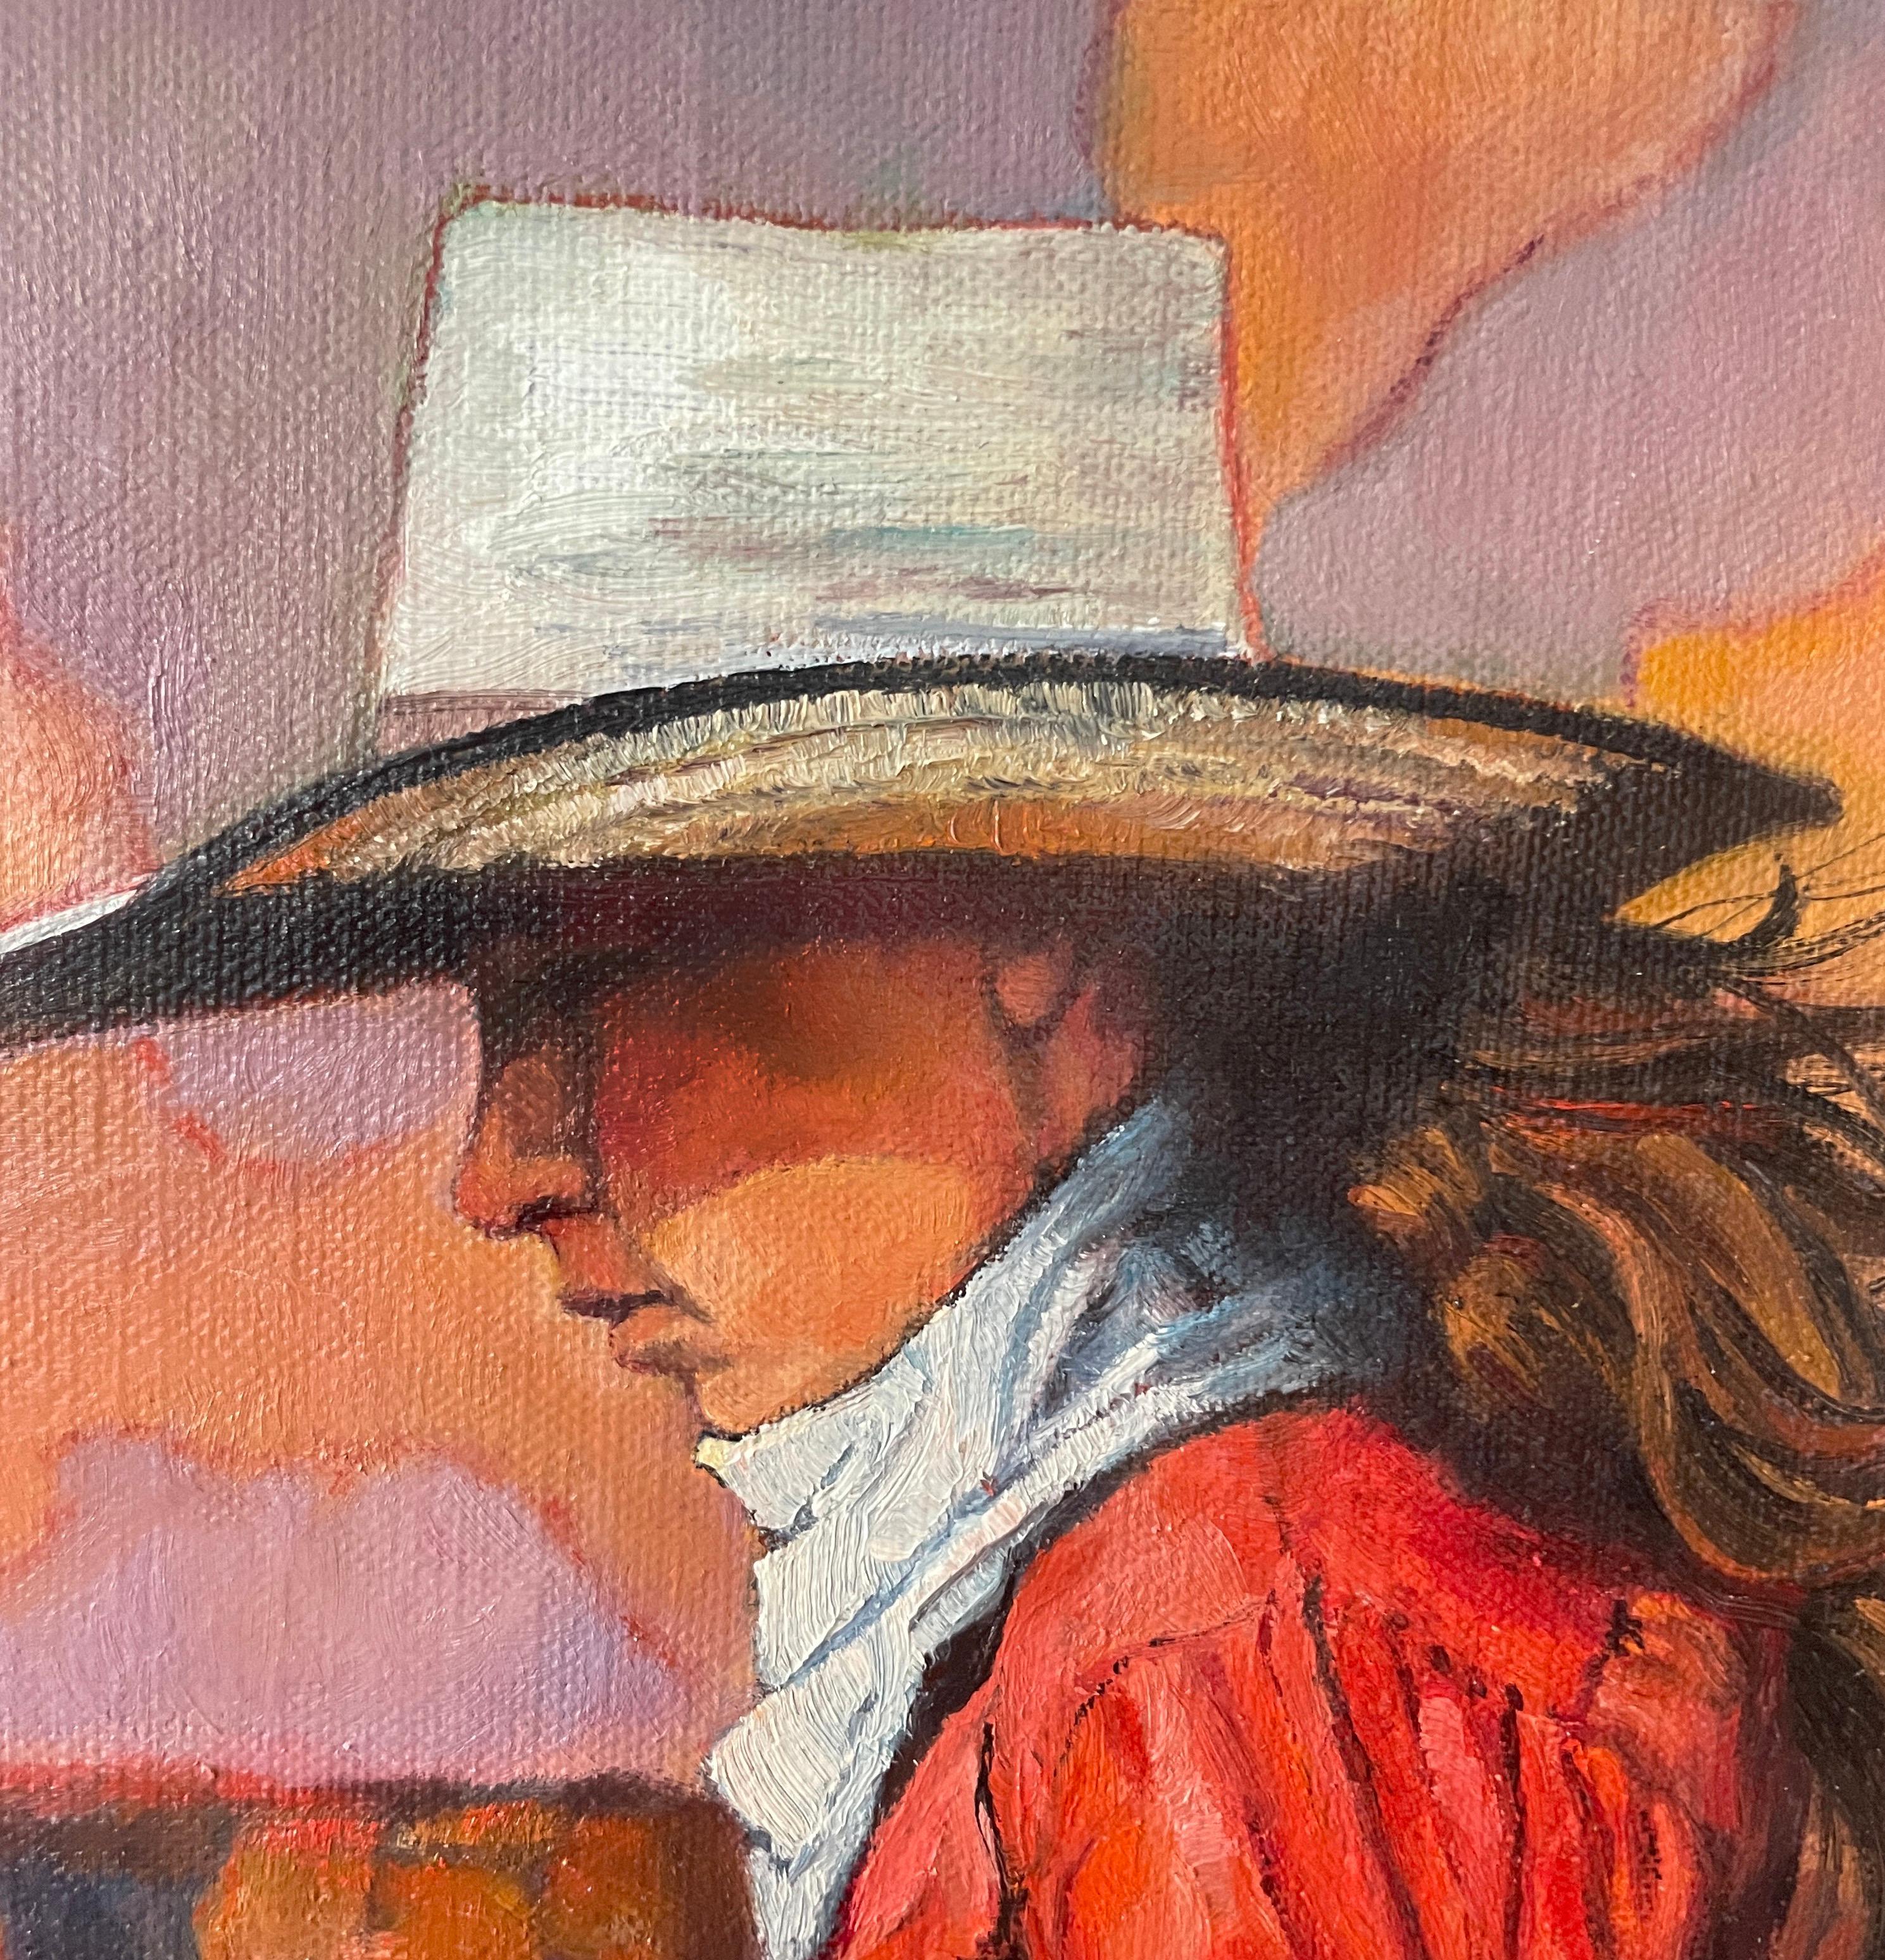 <p>Artist Comments<br>Artist Jan Fontecchio Perley paints a portrait of a young cowgirl riding horseback. Her shadowed profile reveals a look of steadfast determination. Jan depicts a familiar scene growing up in the west. 